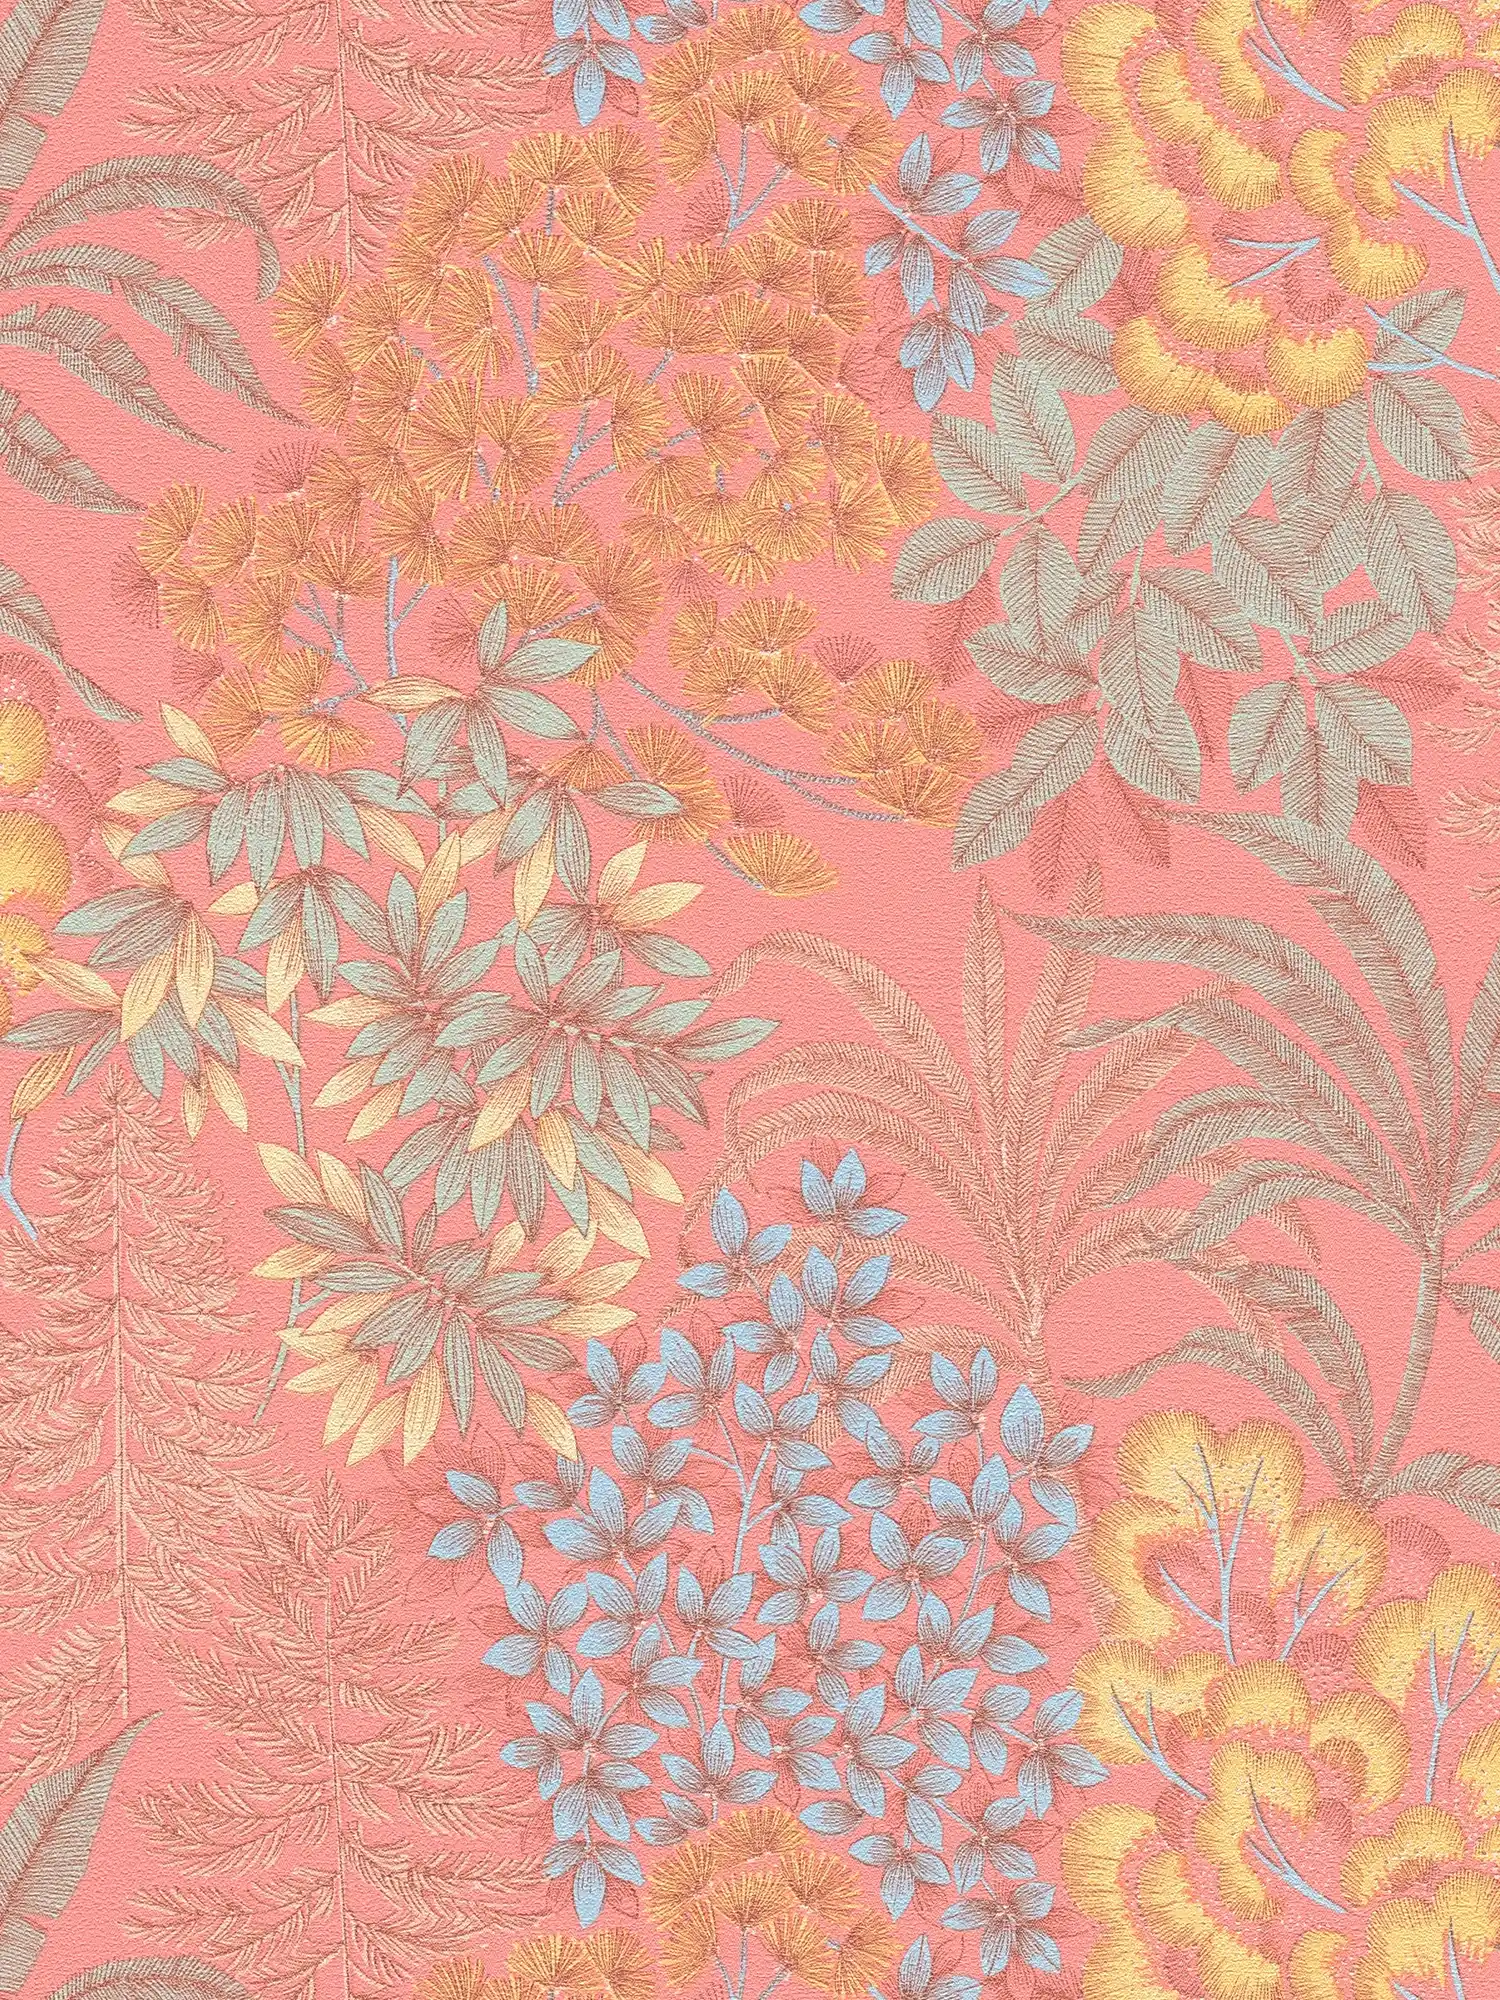 Playful floral wallpaper in a subtle colour - pink, blue, yellow
